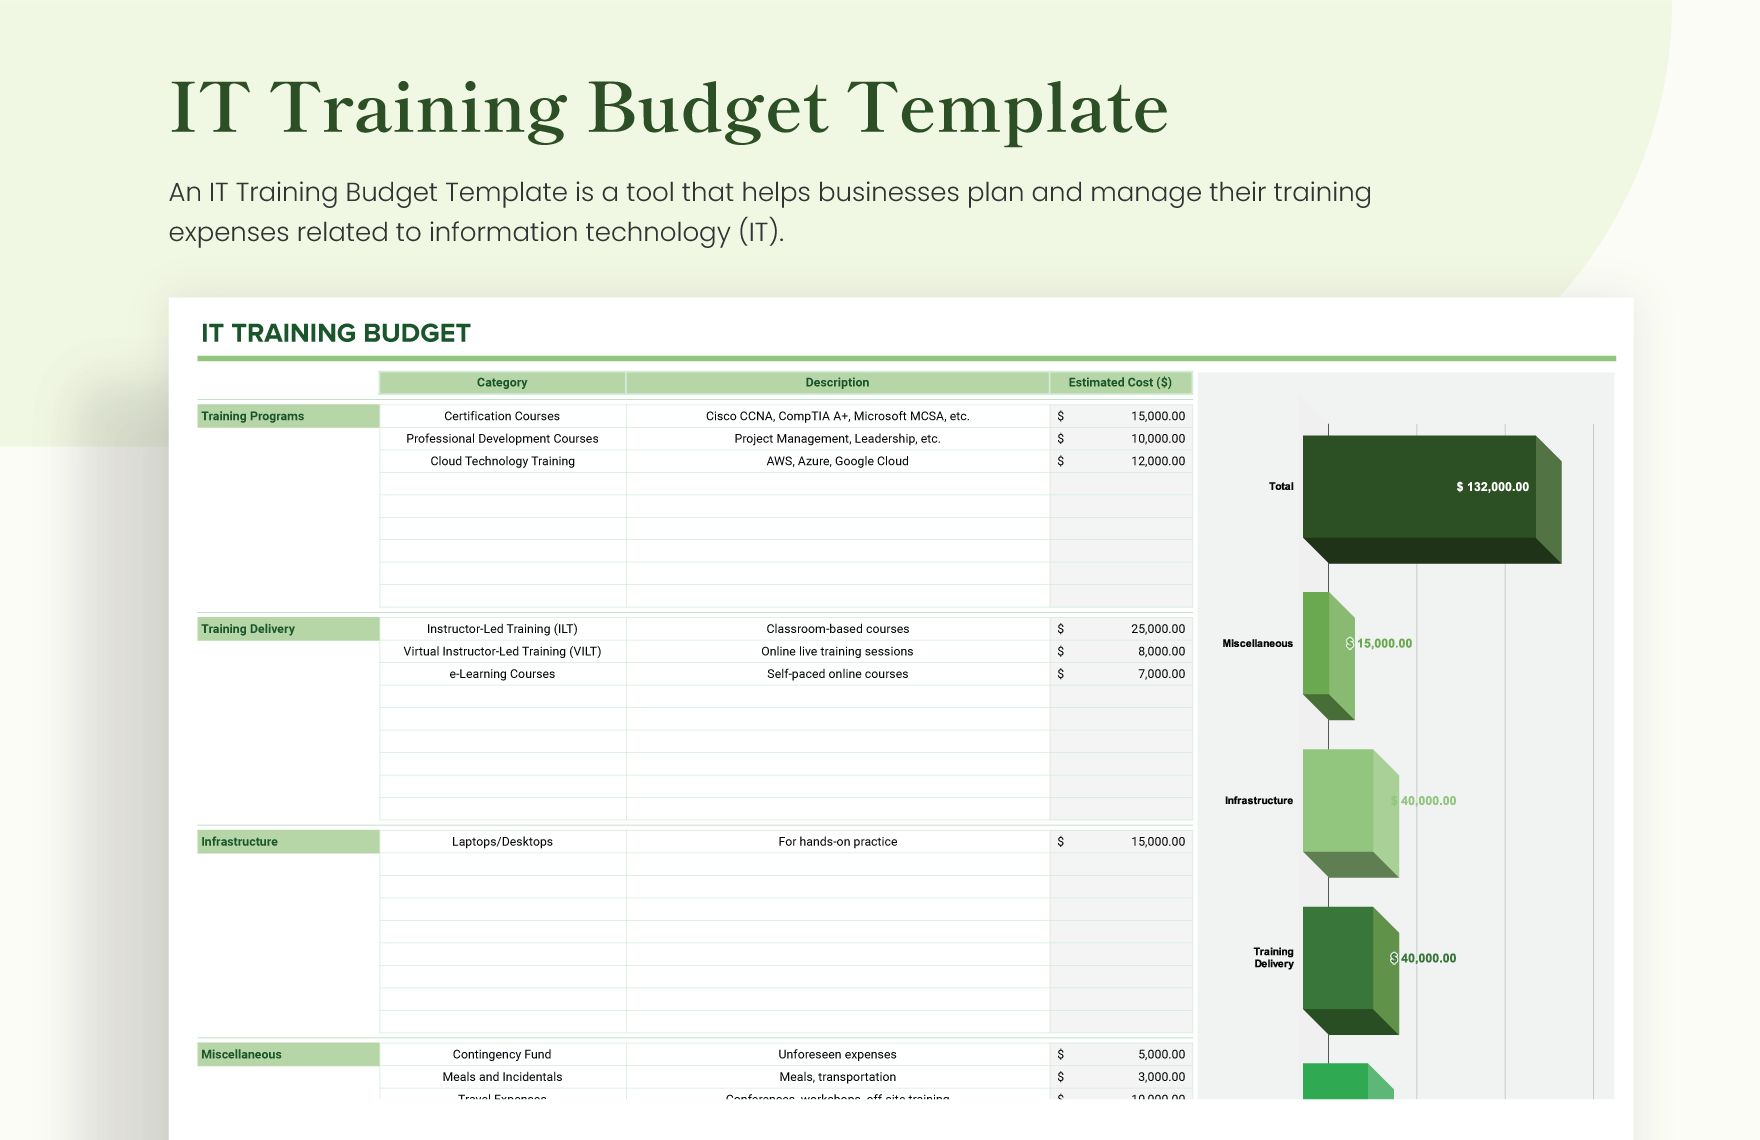 IT Training Budget Template in Excel, Google Sheets